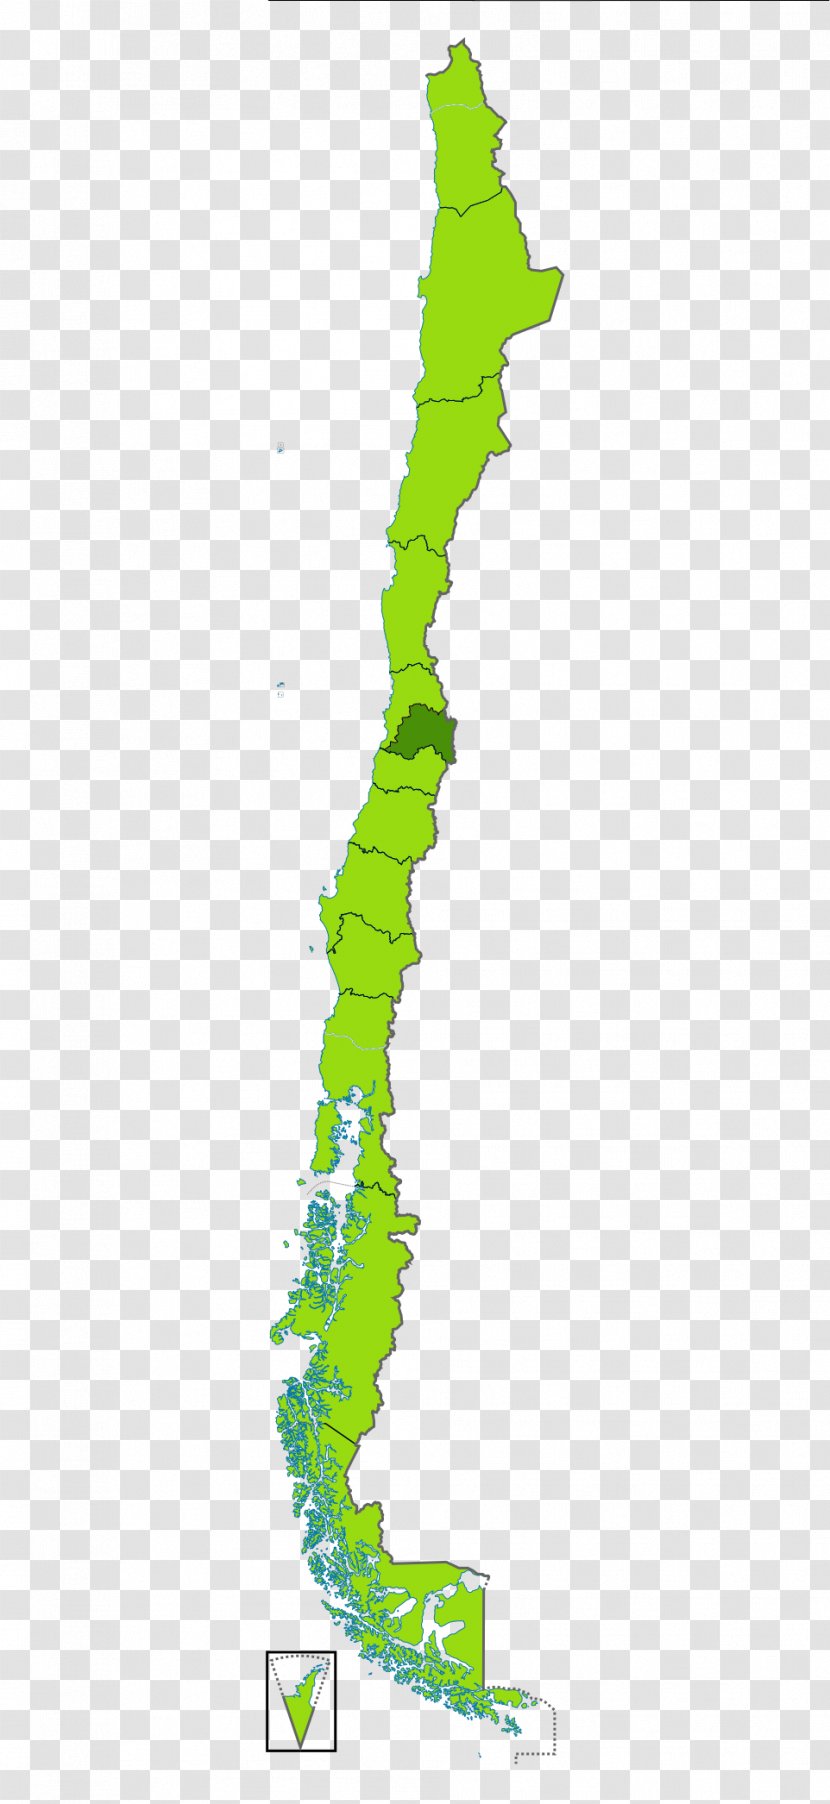 Santiago Blank Map - Chile - Chili Transparent PNG